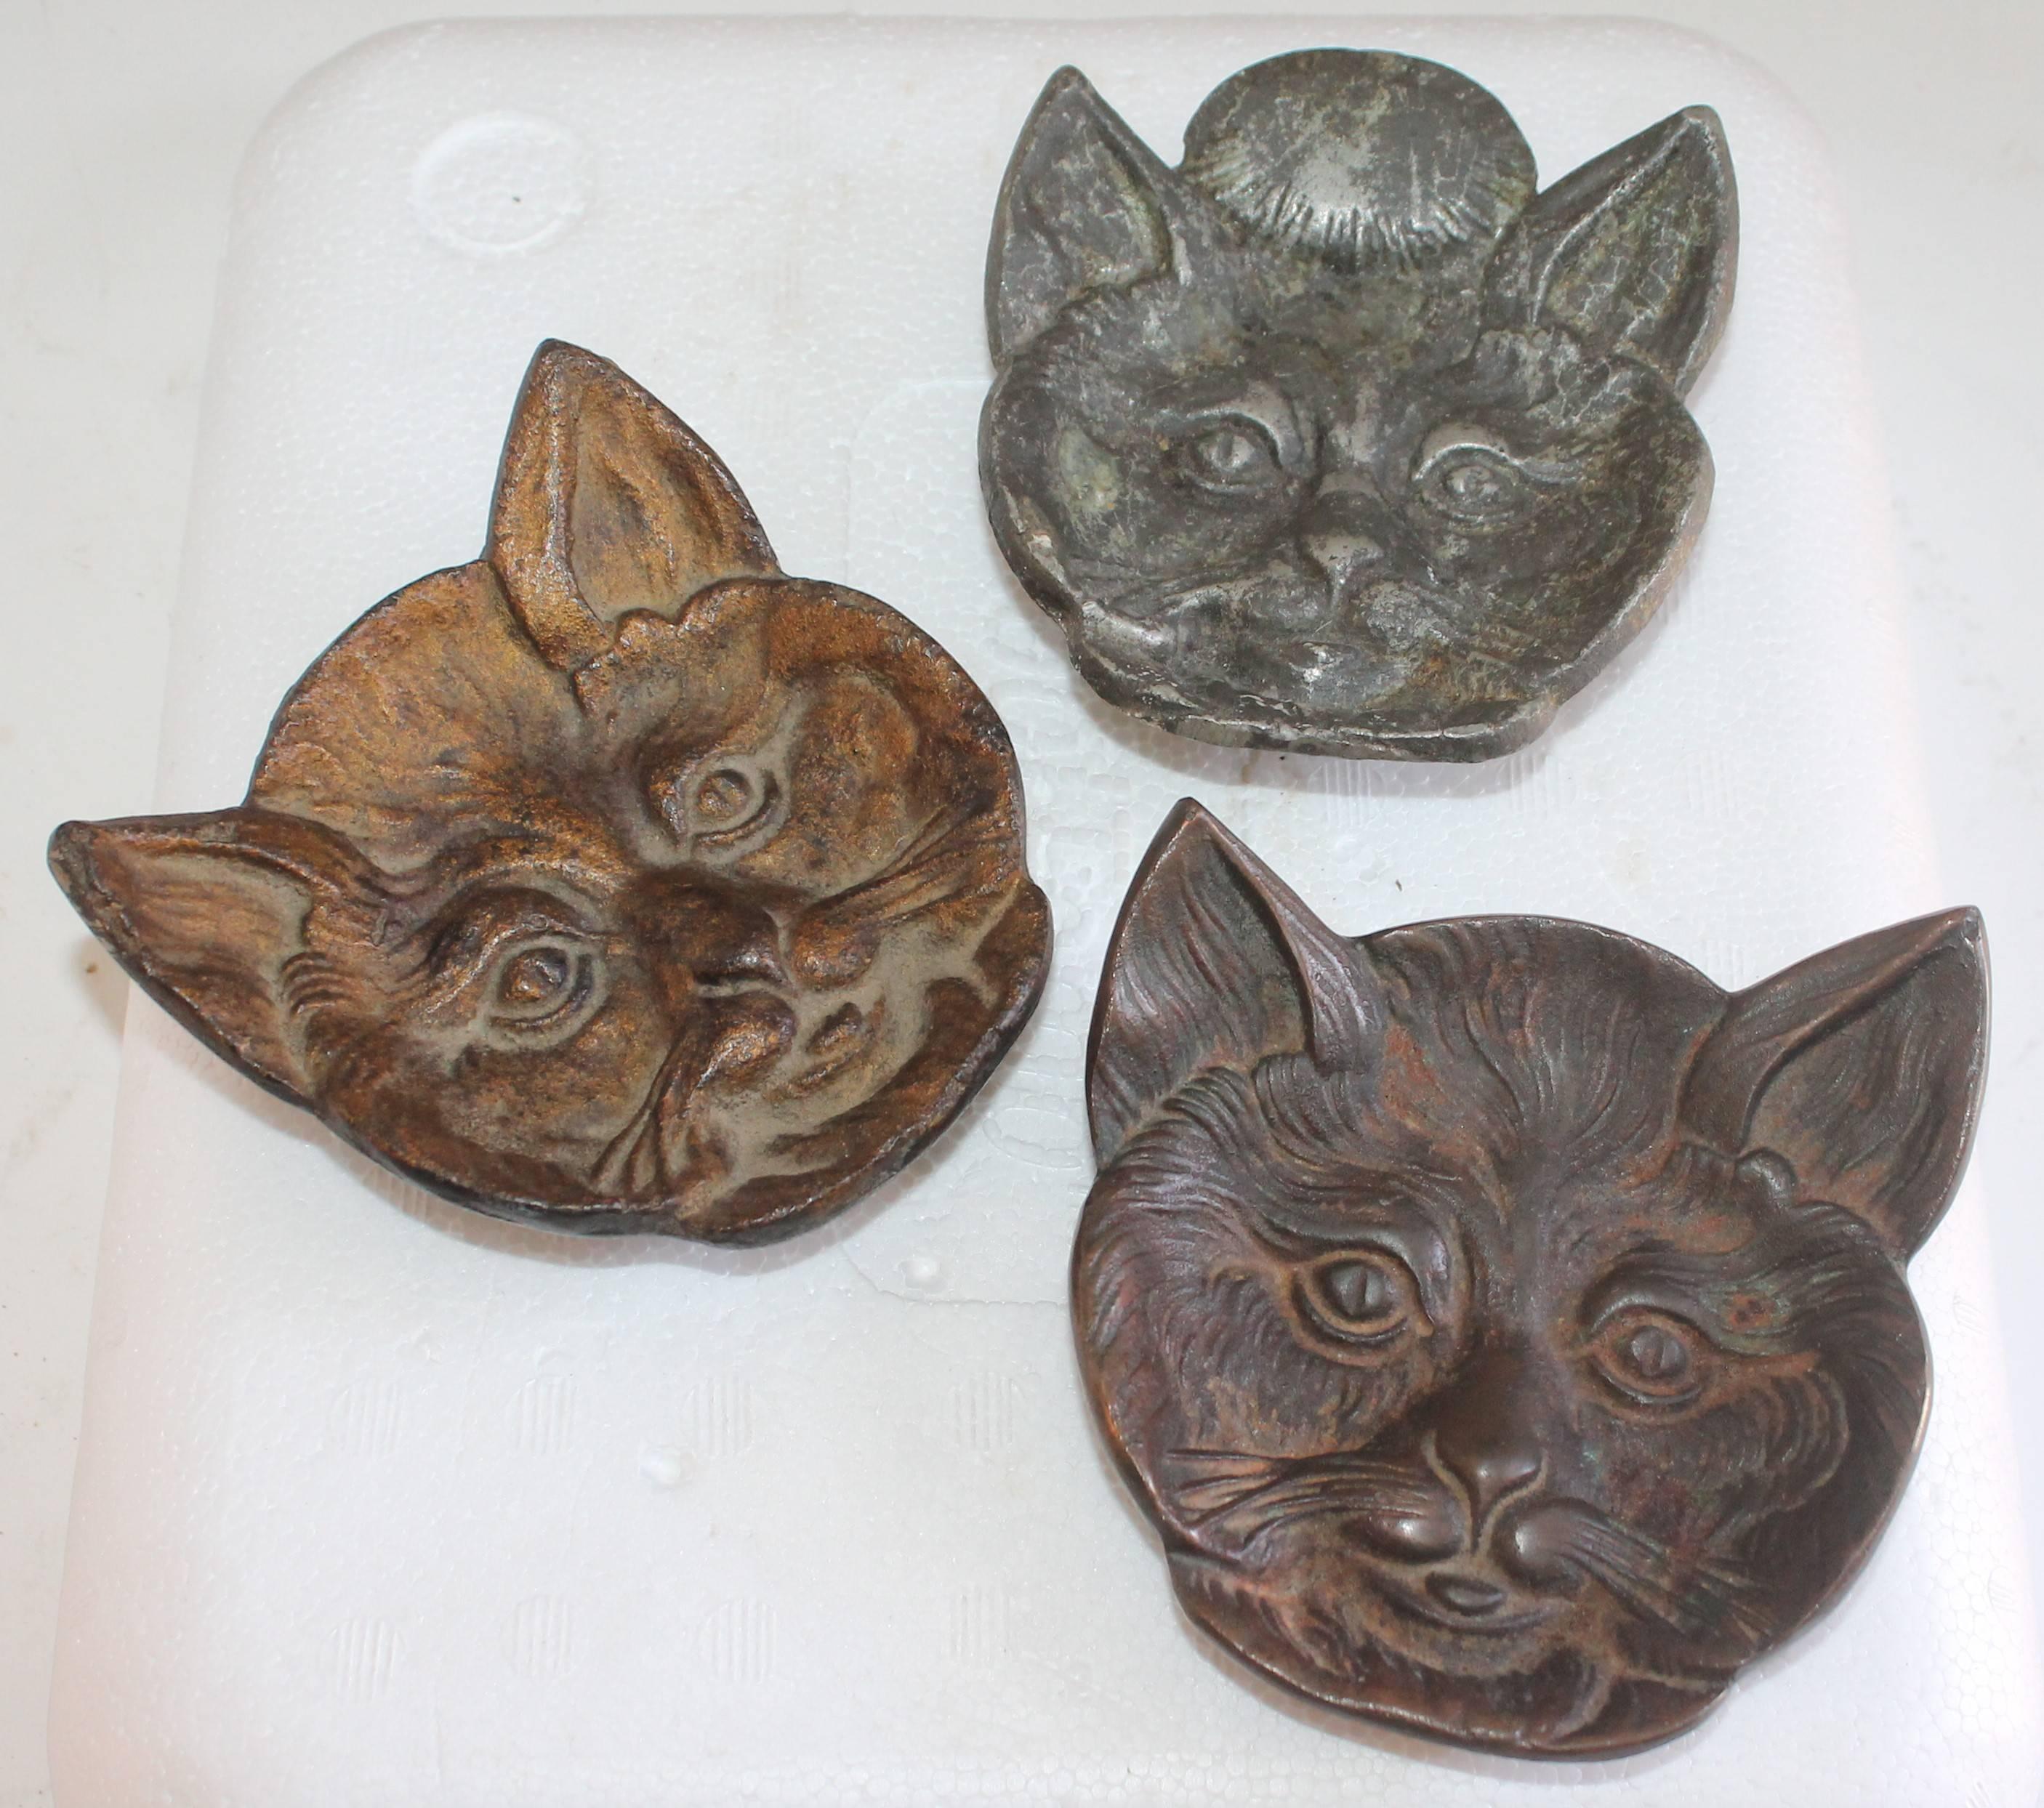 Collection of three 19th century cast iron cats trays. These cats look like they were a give away from some iron works company. Perhaps a pot belly stove or old iron forger. They have a wonderful aged patina and all three are slightly different